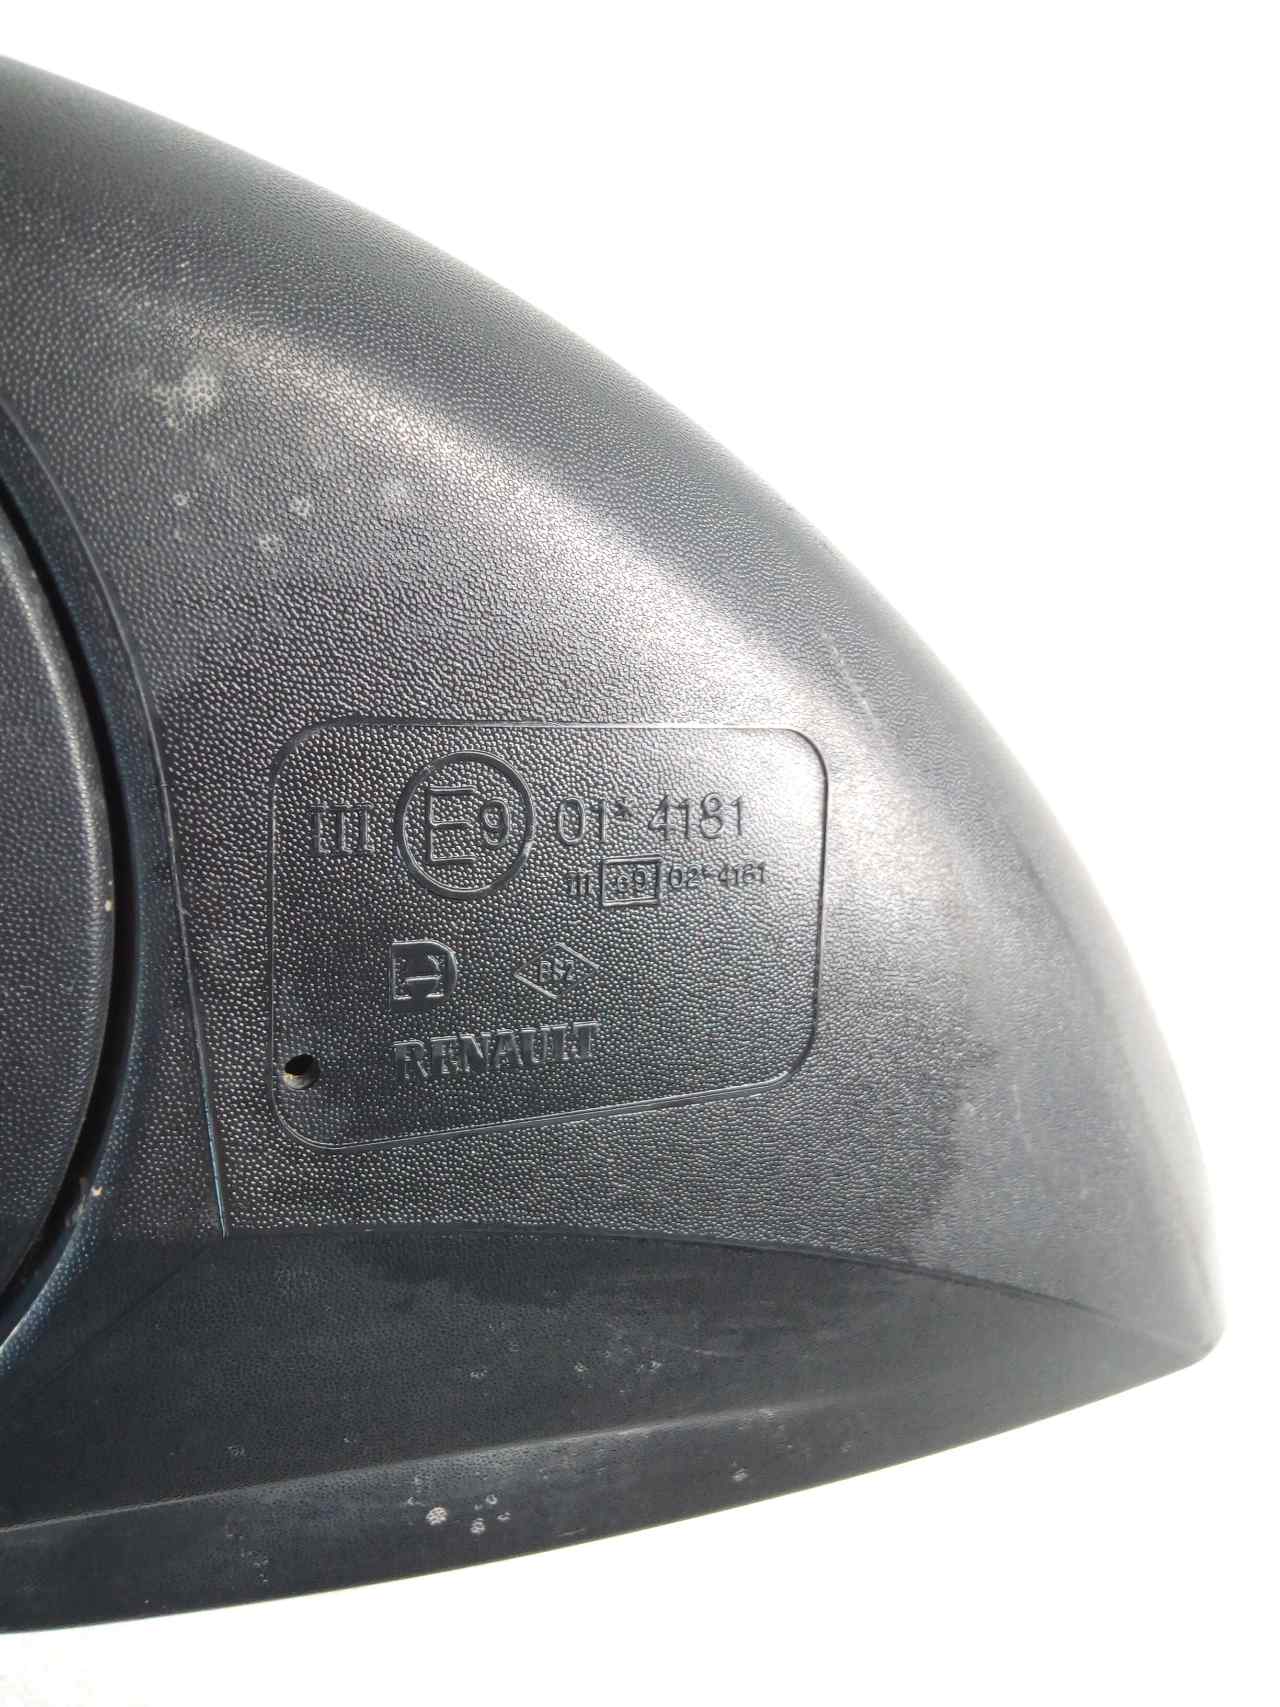 RENAULT Espace 4 generation (2002-2014) Left Side Wing Mirror 014181 20063711